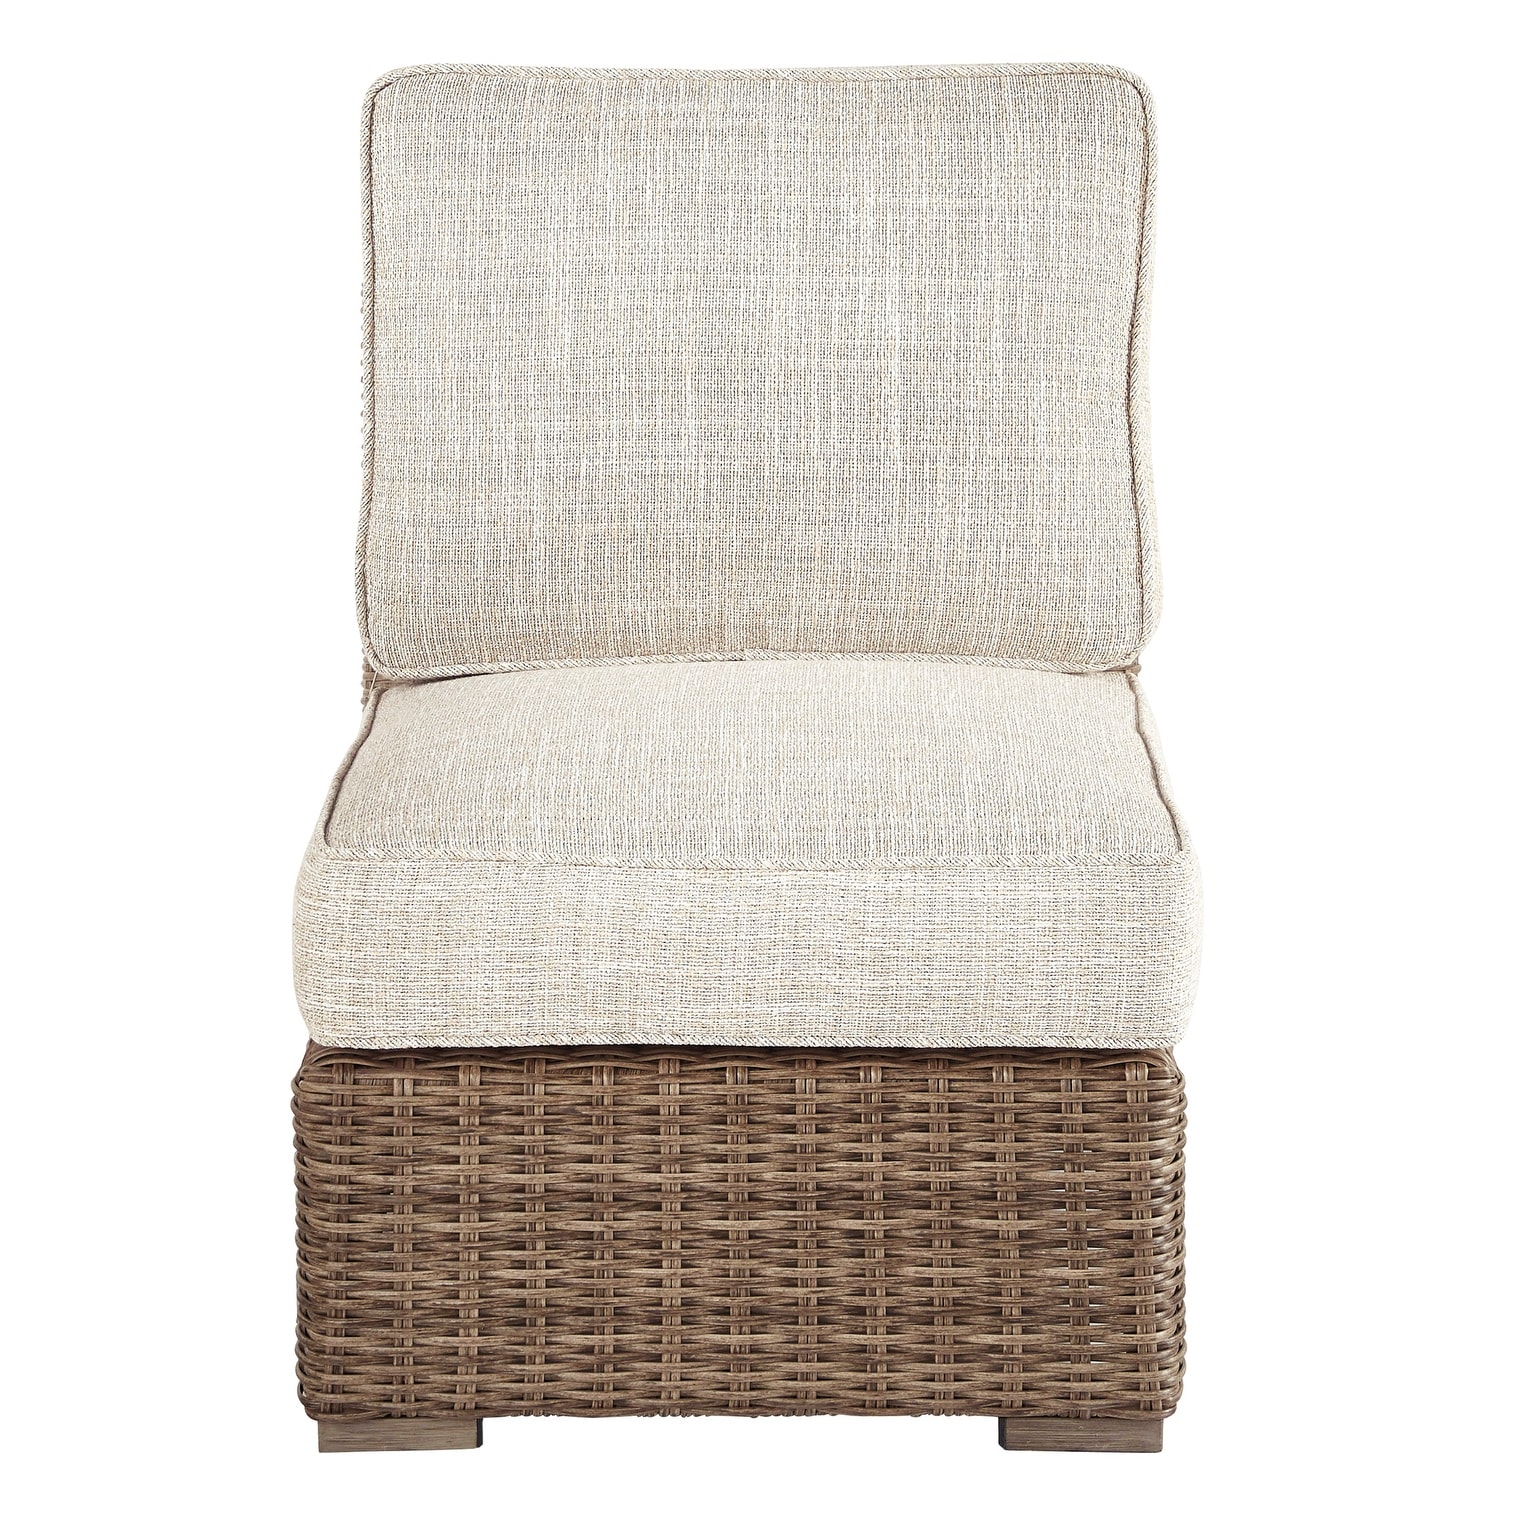 Signature Design By Ashley Beachcroft Outdoor Armless Chair - Beige